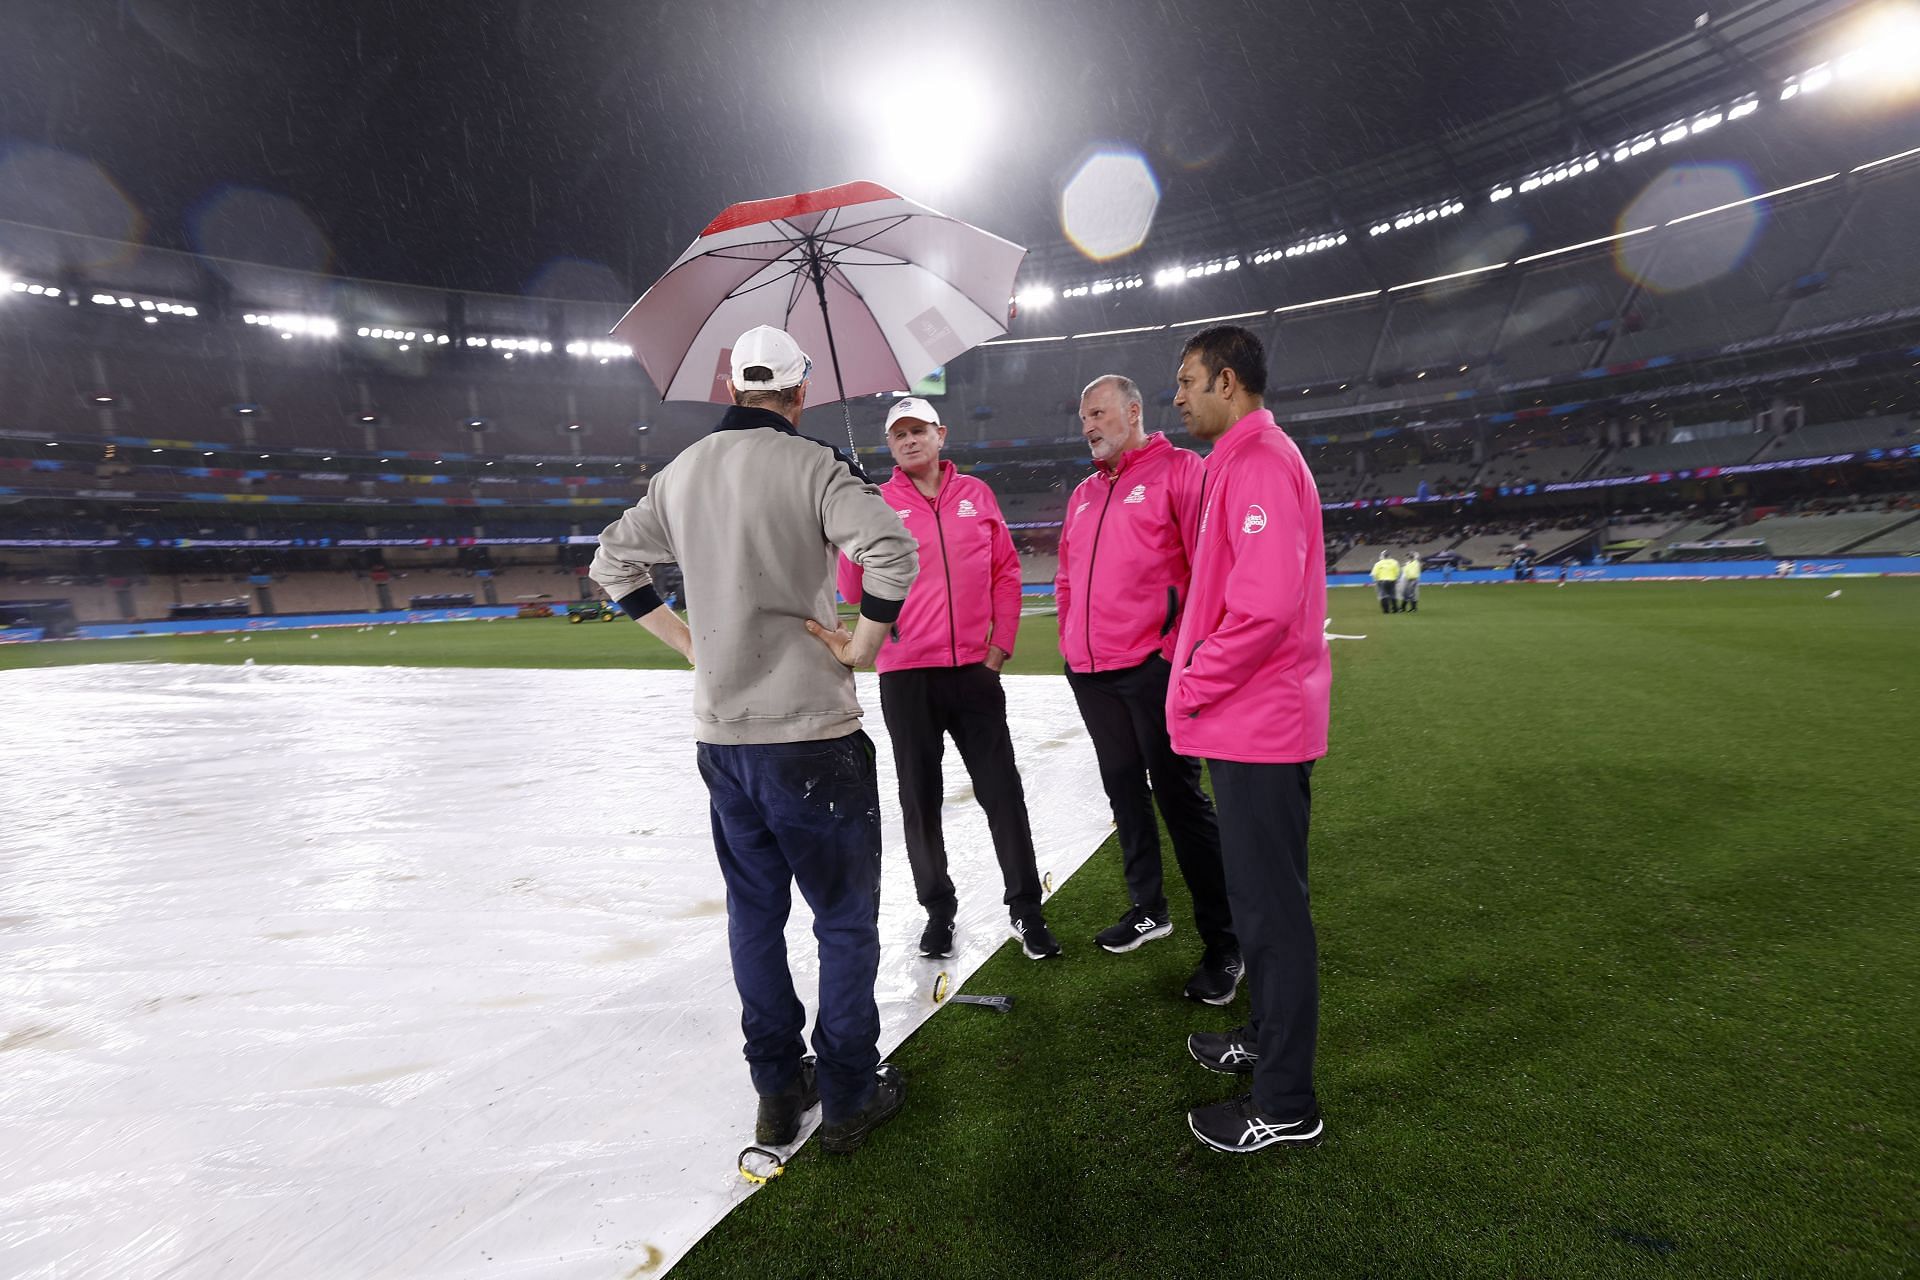 The New Zealand versus Afghanistan game was washed out without a ball being bowled.